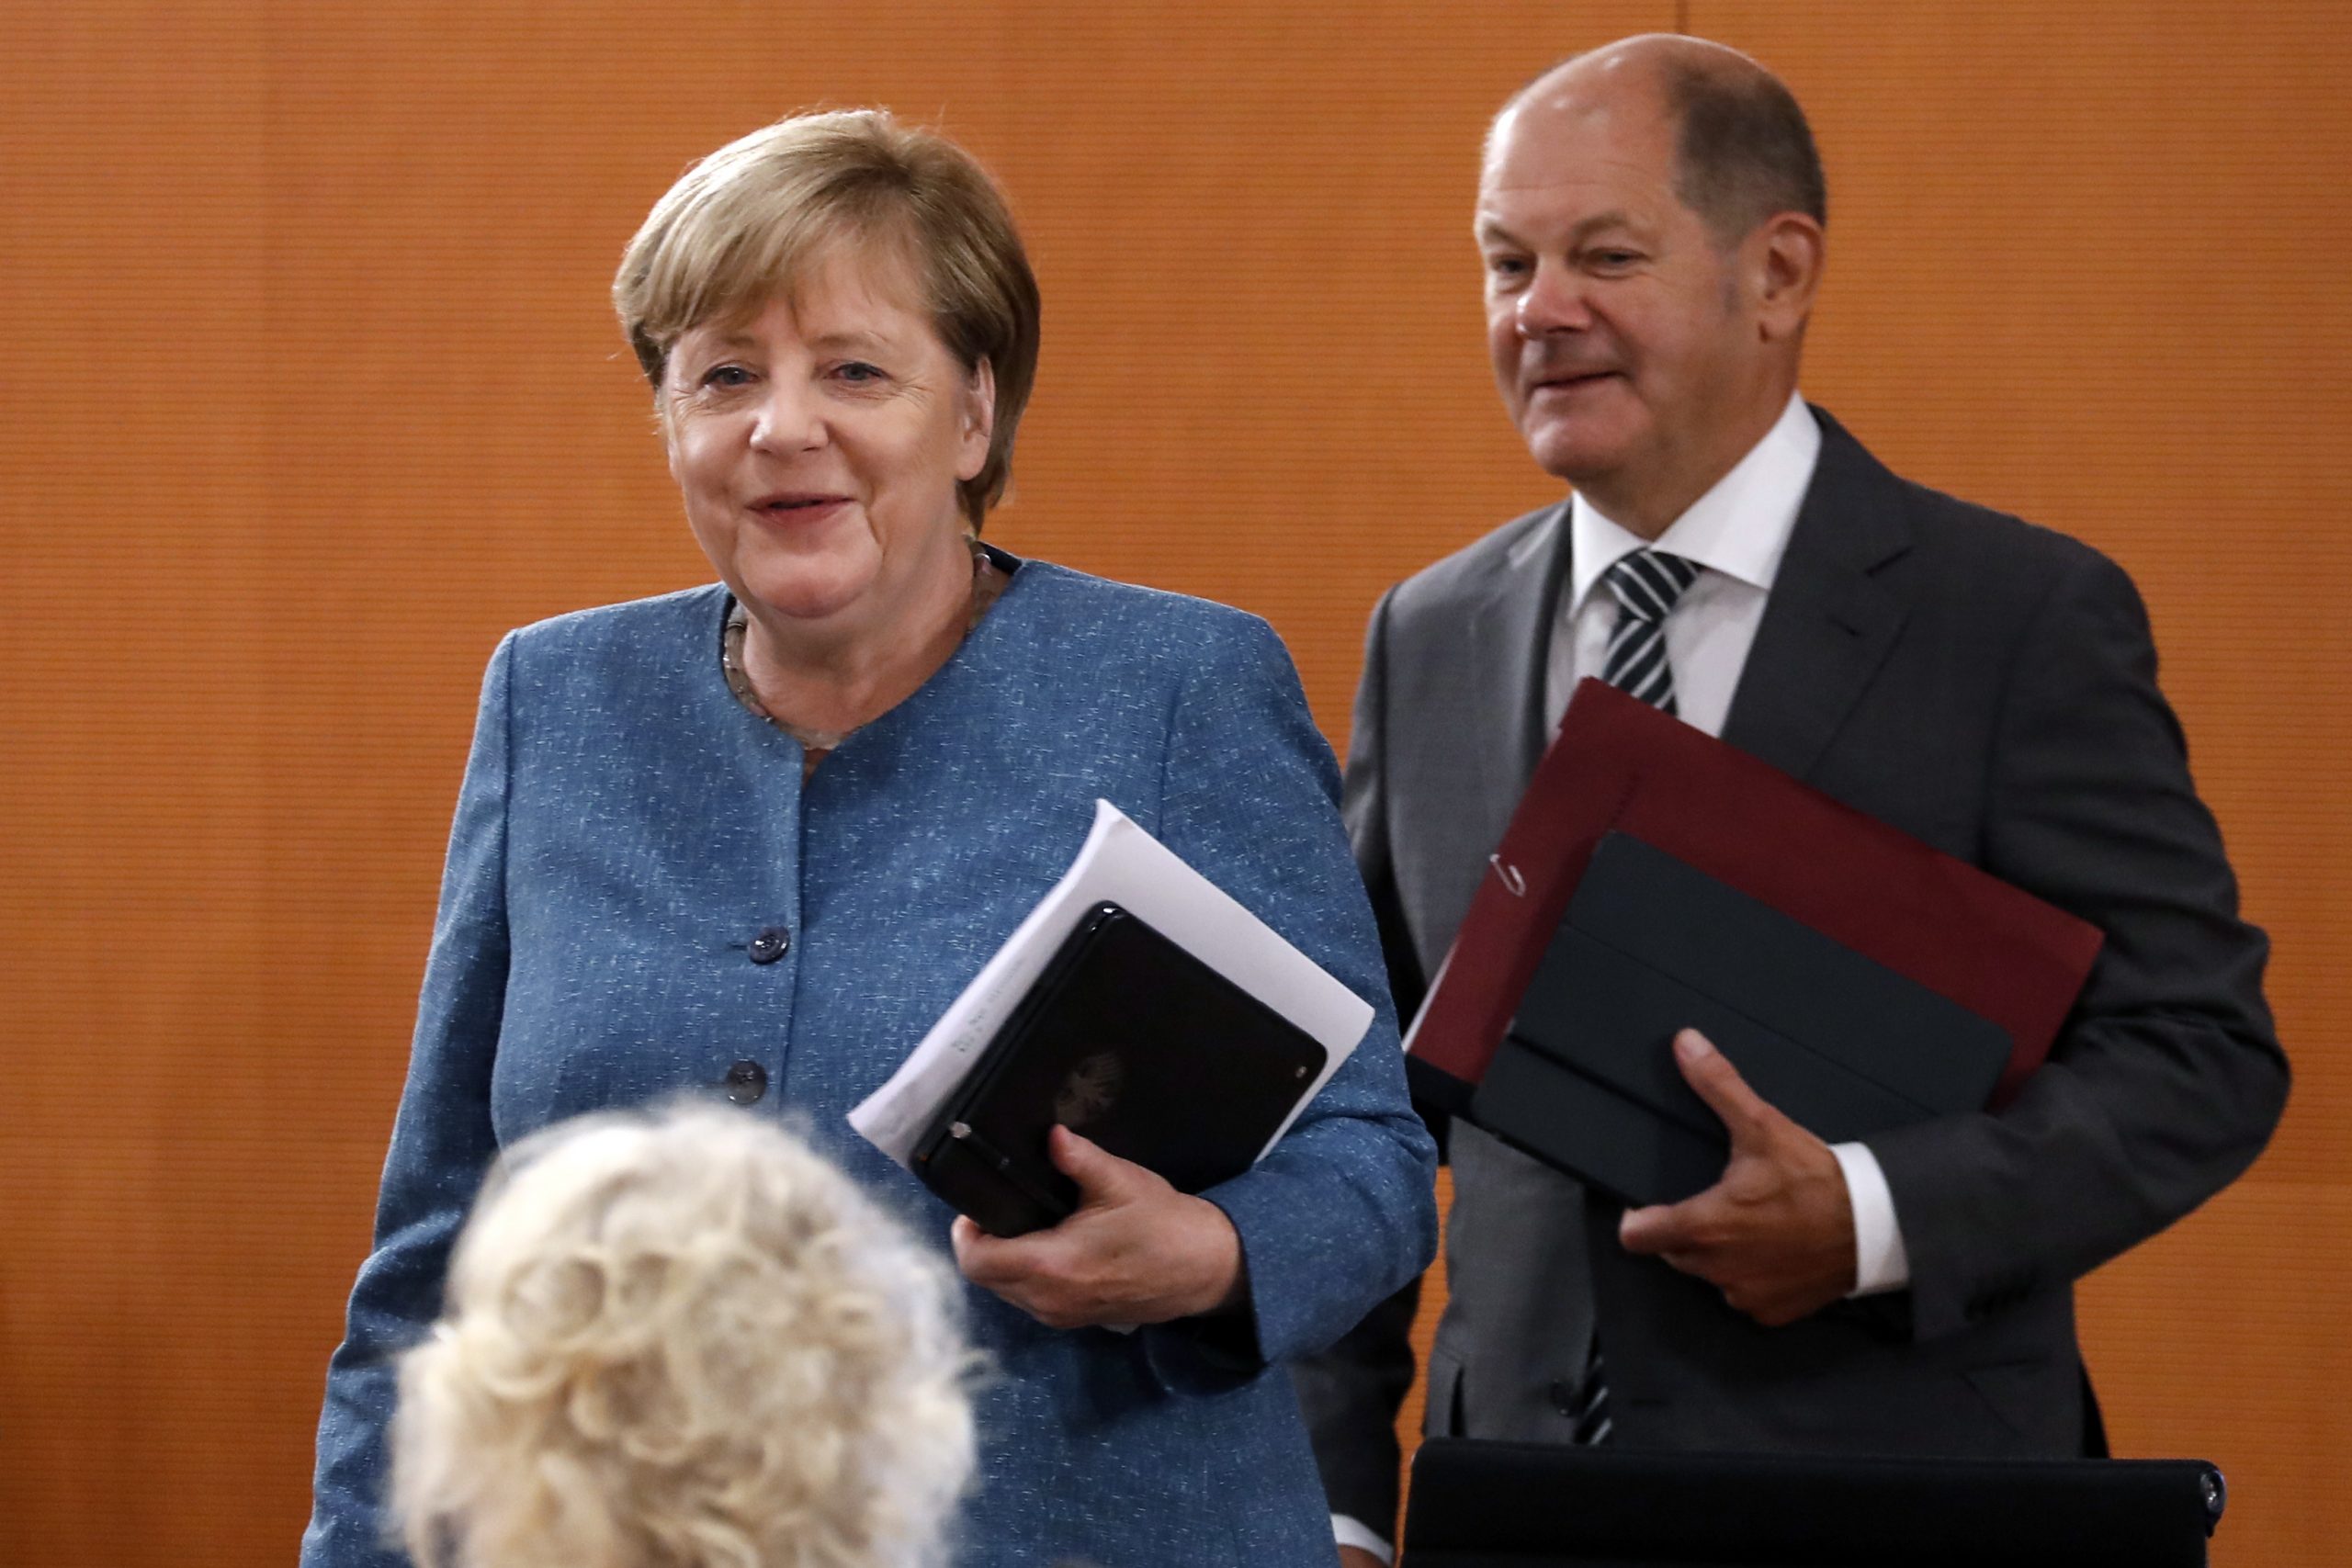 epa08598645 German Chancellor Angela Merkel (L) and Finance Minister Olaf Scholz (R) arrive for a cabinet meeting at the German chancellery in Berlin, Germany, 12 August 2020. The cabinet of the German government meets on a regular basis.  EPA/FELIPE TRUEBA / POOL